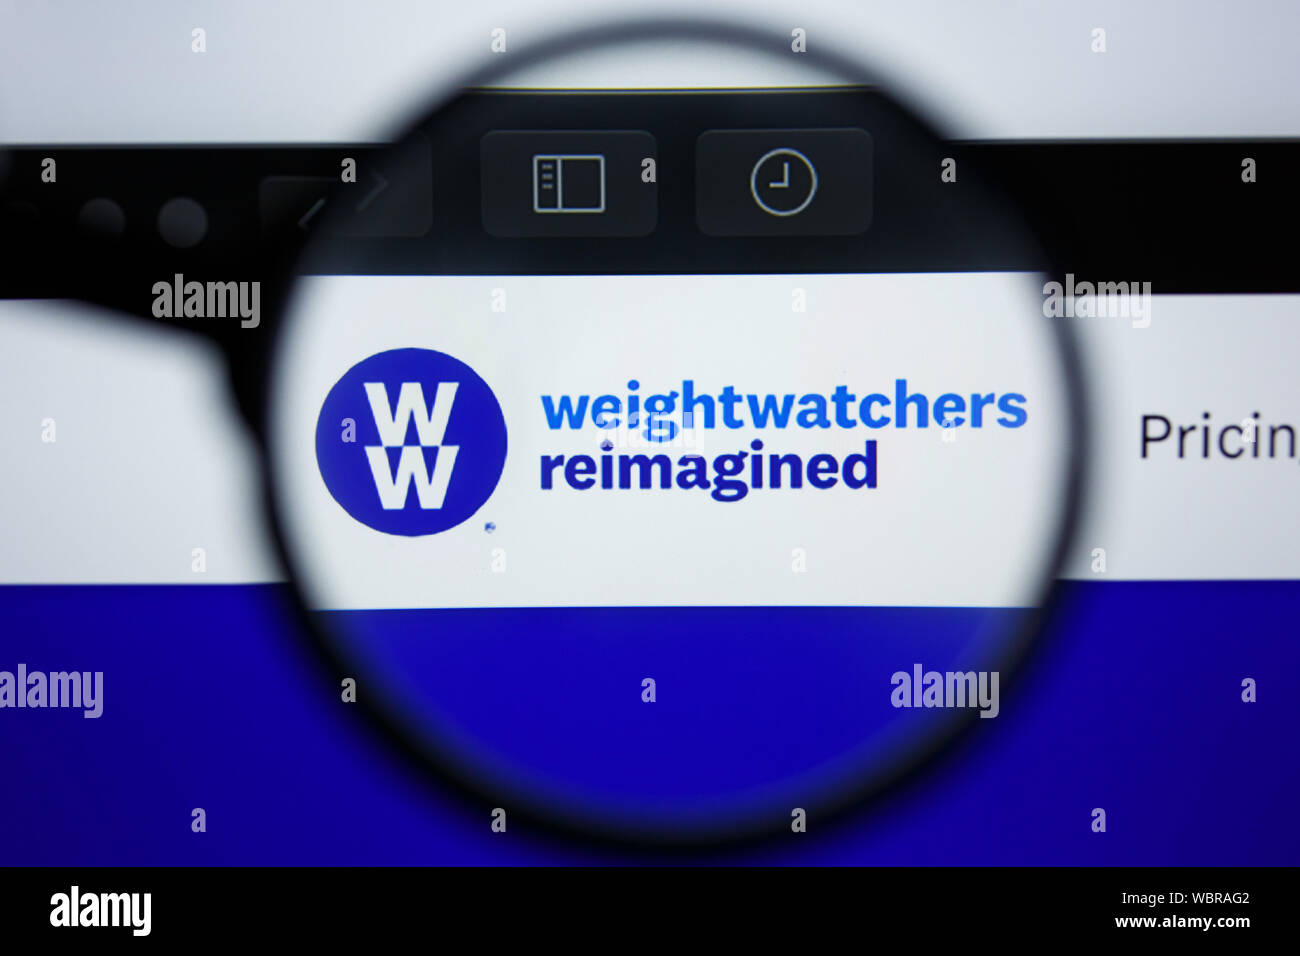 Los Angeles, California, USA - 21 Jule 2019: Illustrative Editorial of weightwatchers.com website homepage. weightwatchers REIMAGINED logo visible on display screen. Stock Photo